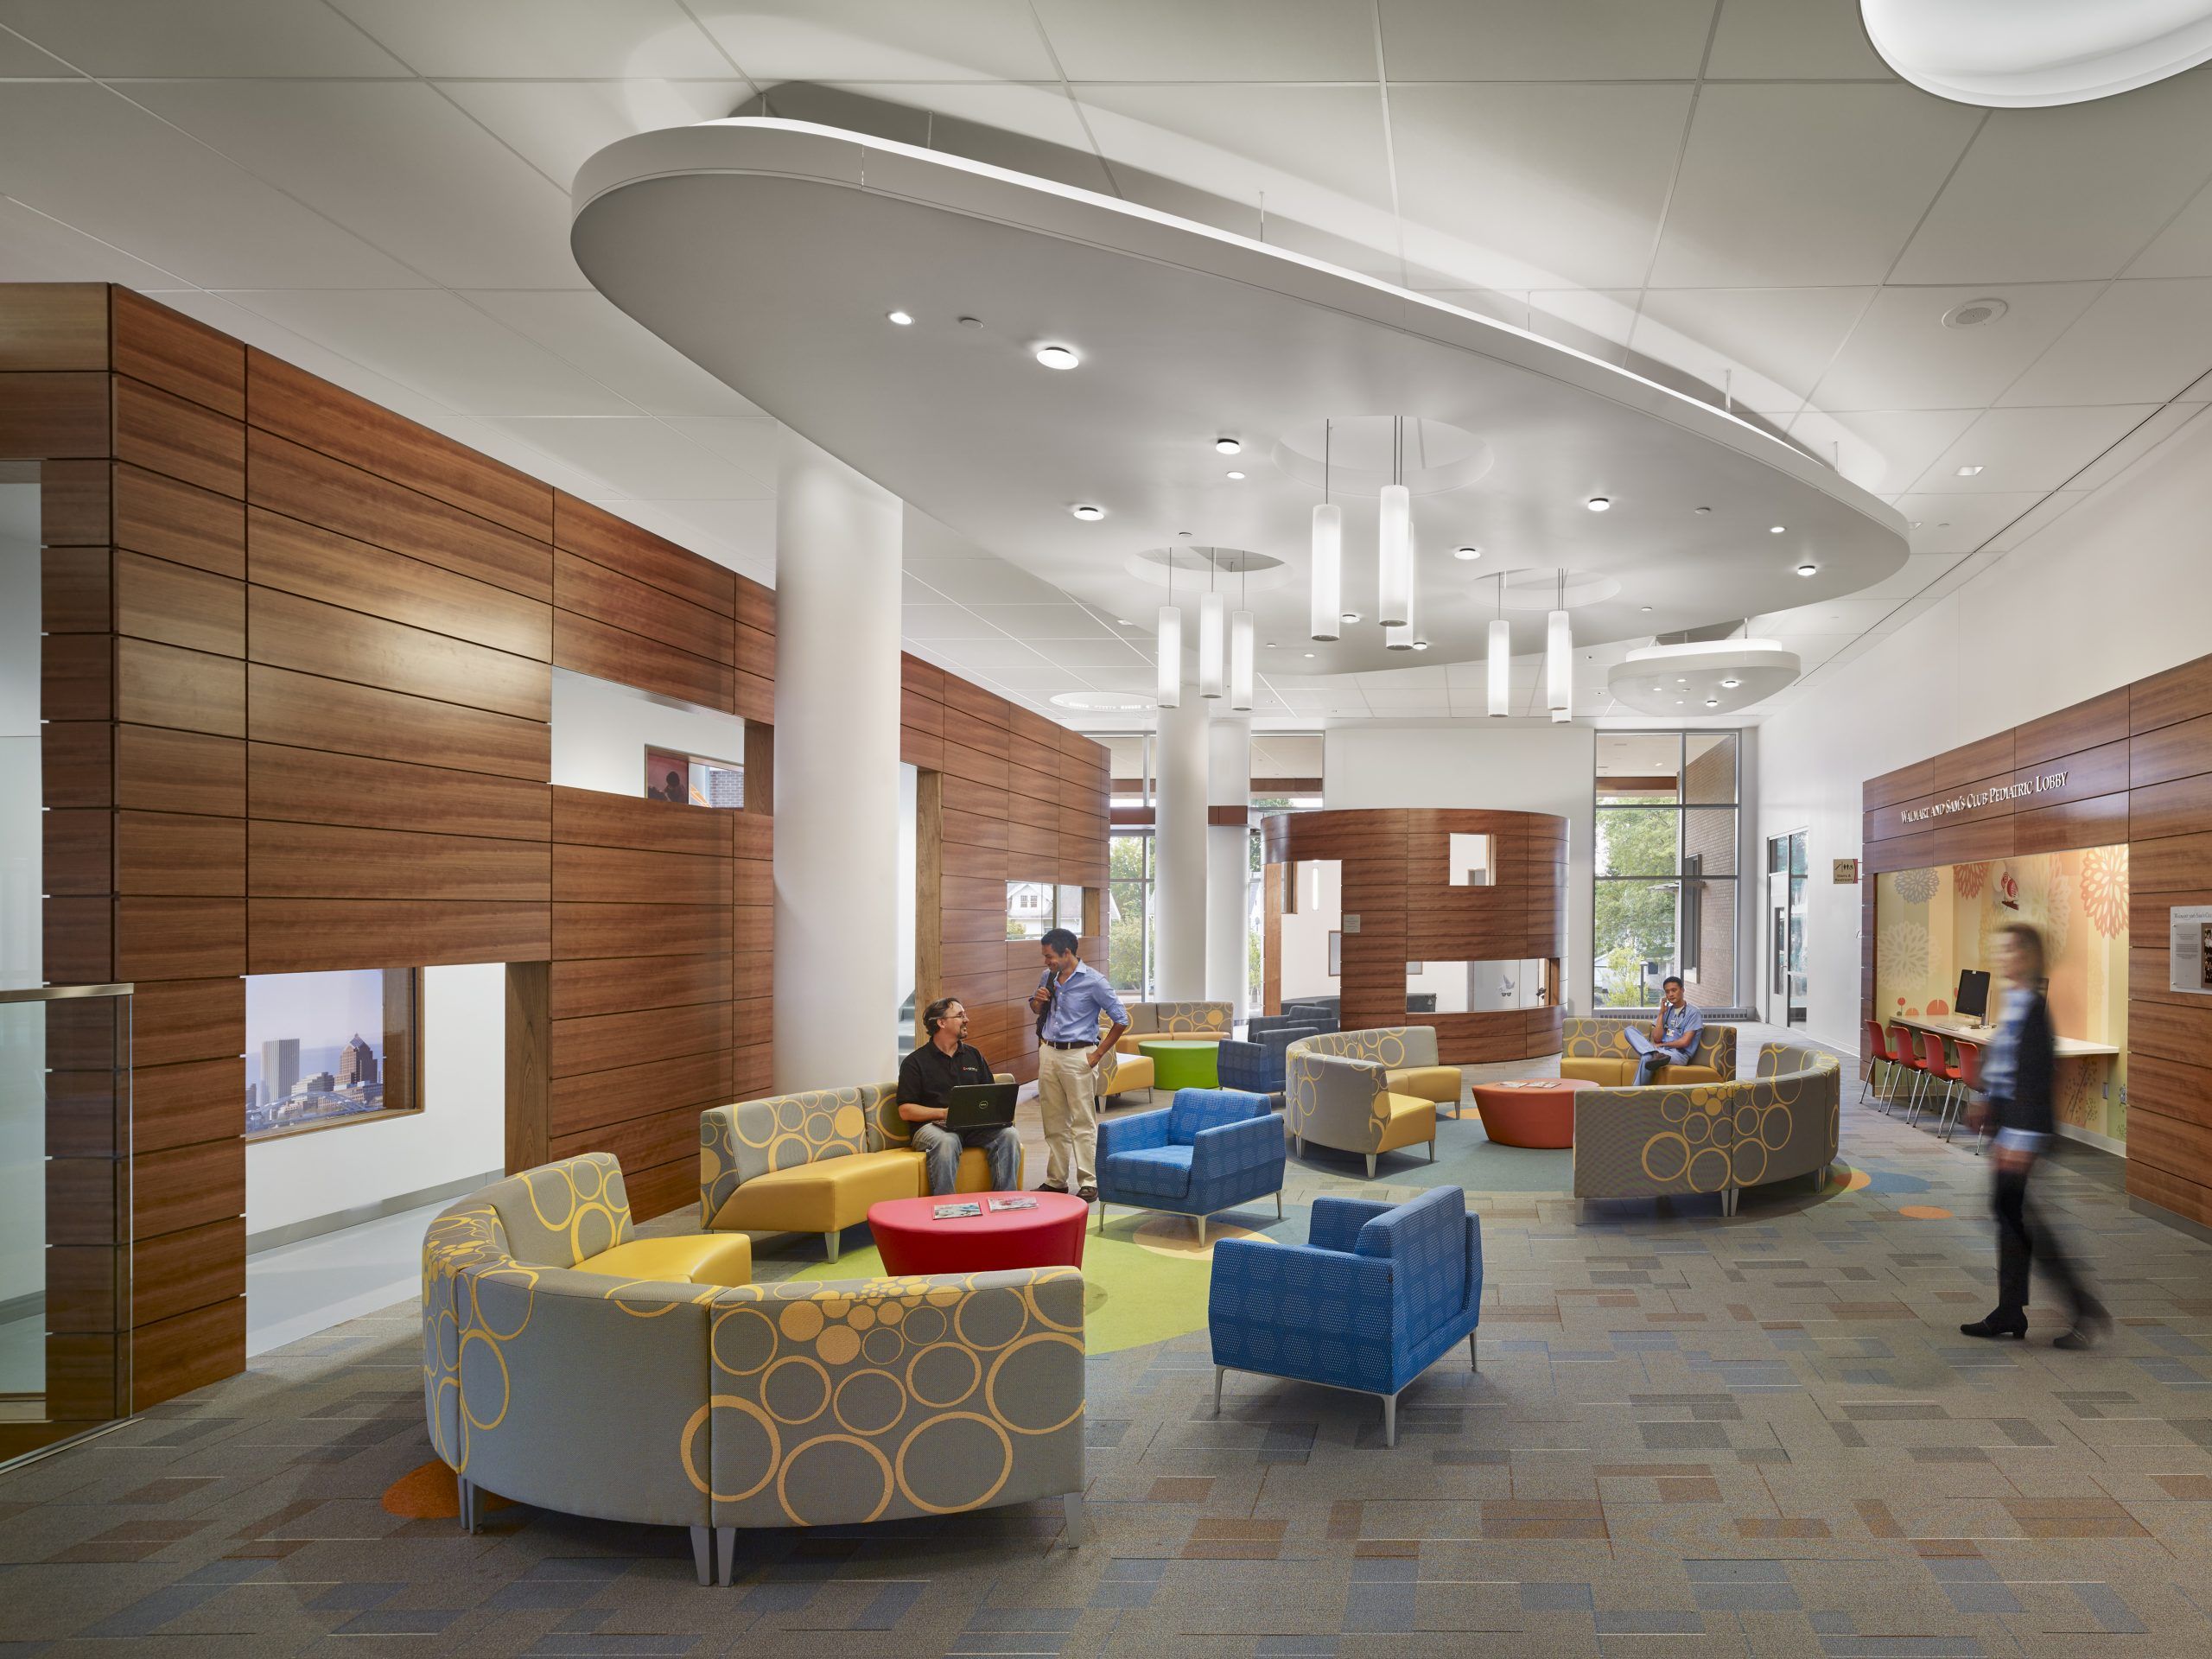 People lounge in a pediatric lobby with wood paneling, colorful furniture, and scaled entrances for children at play